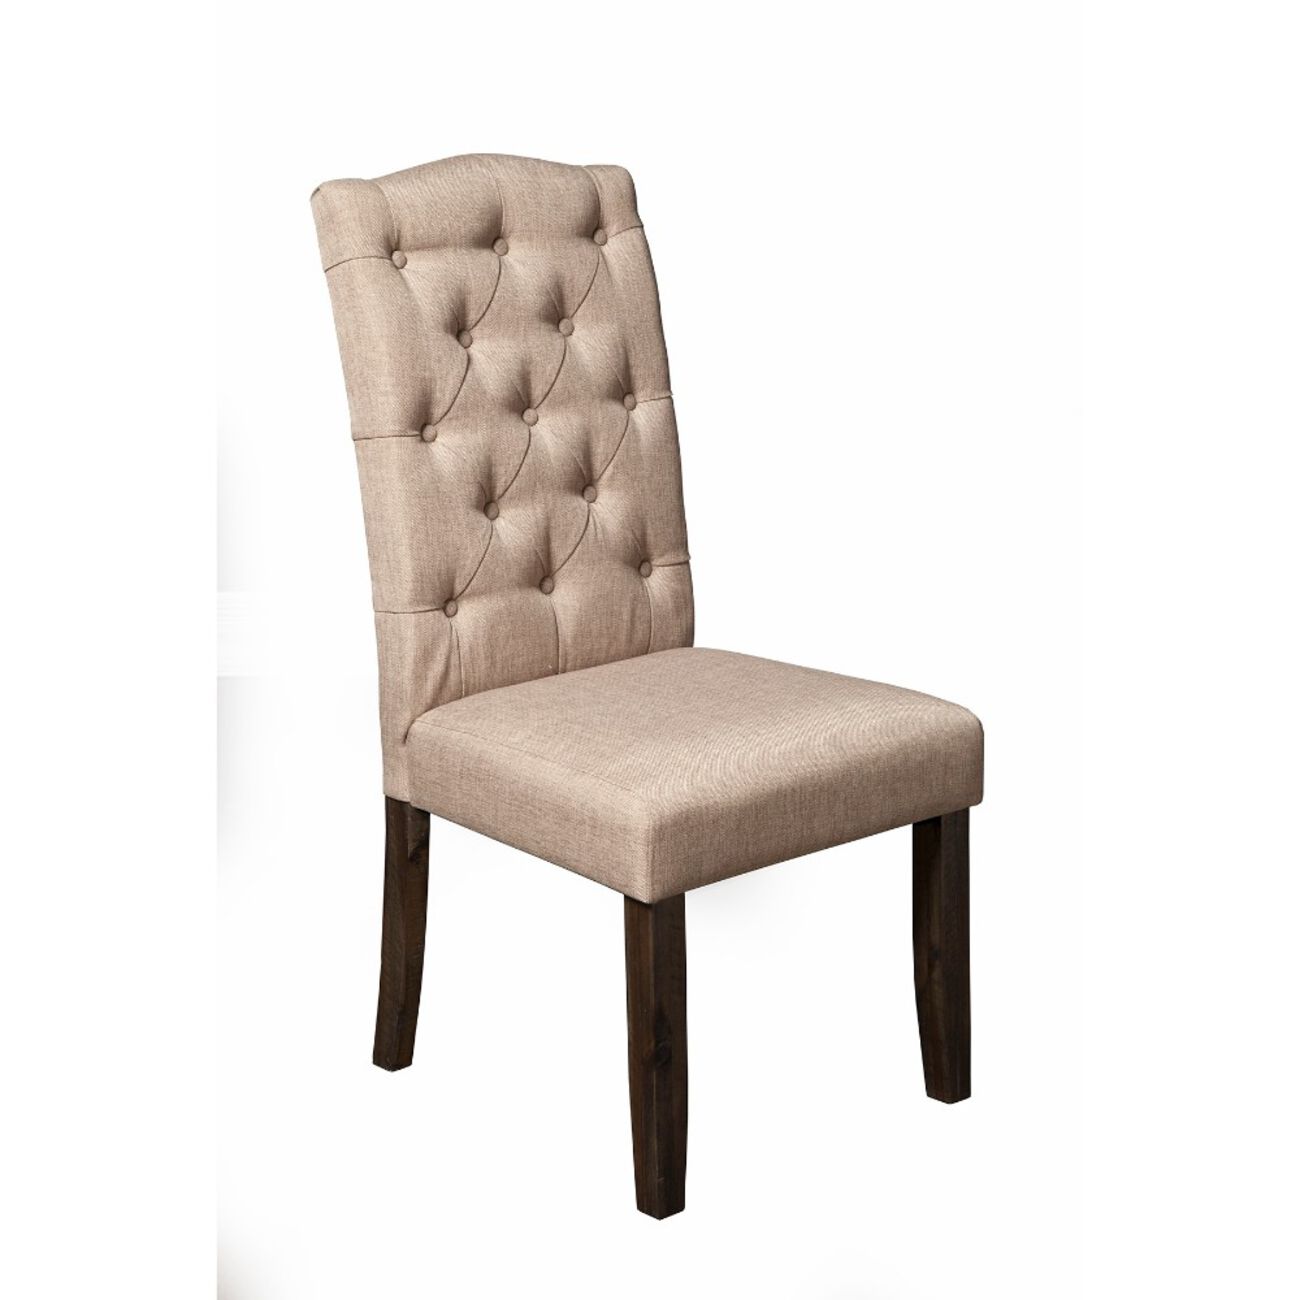 Set of 2 Button Tufted Parson Chairs, Beige